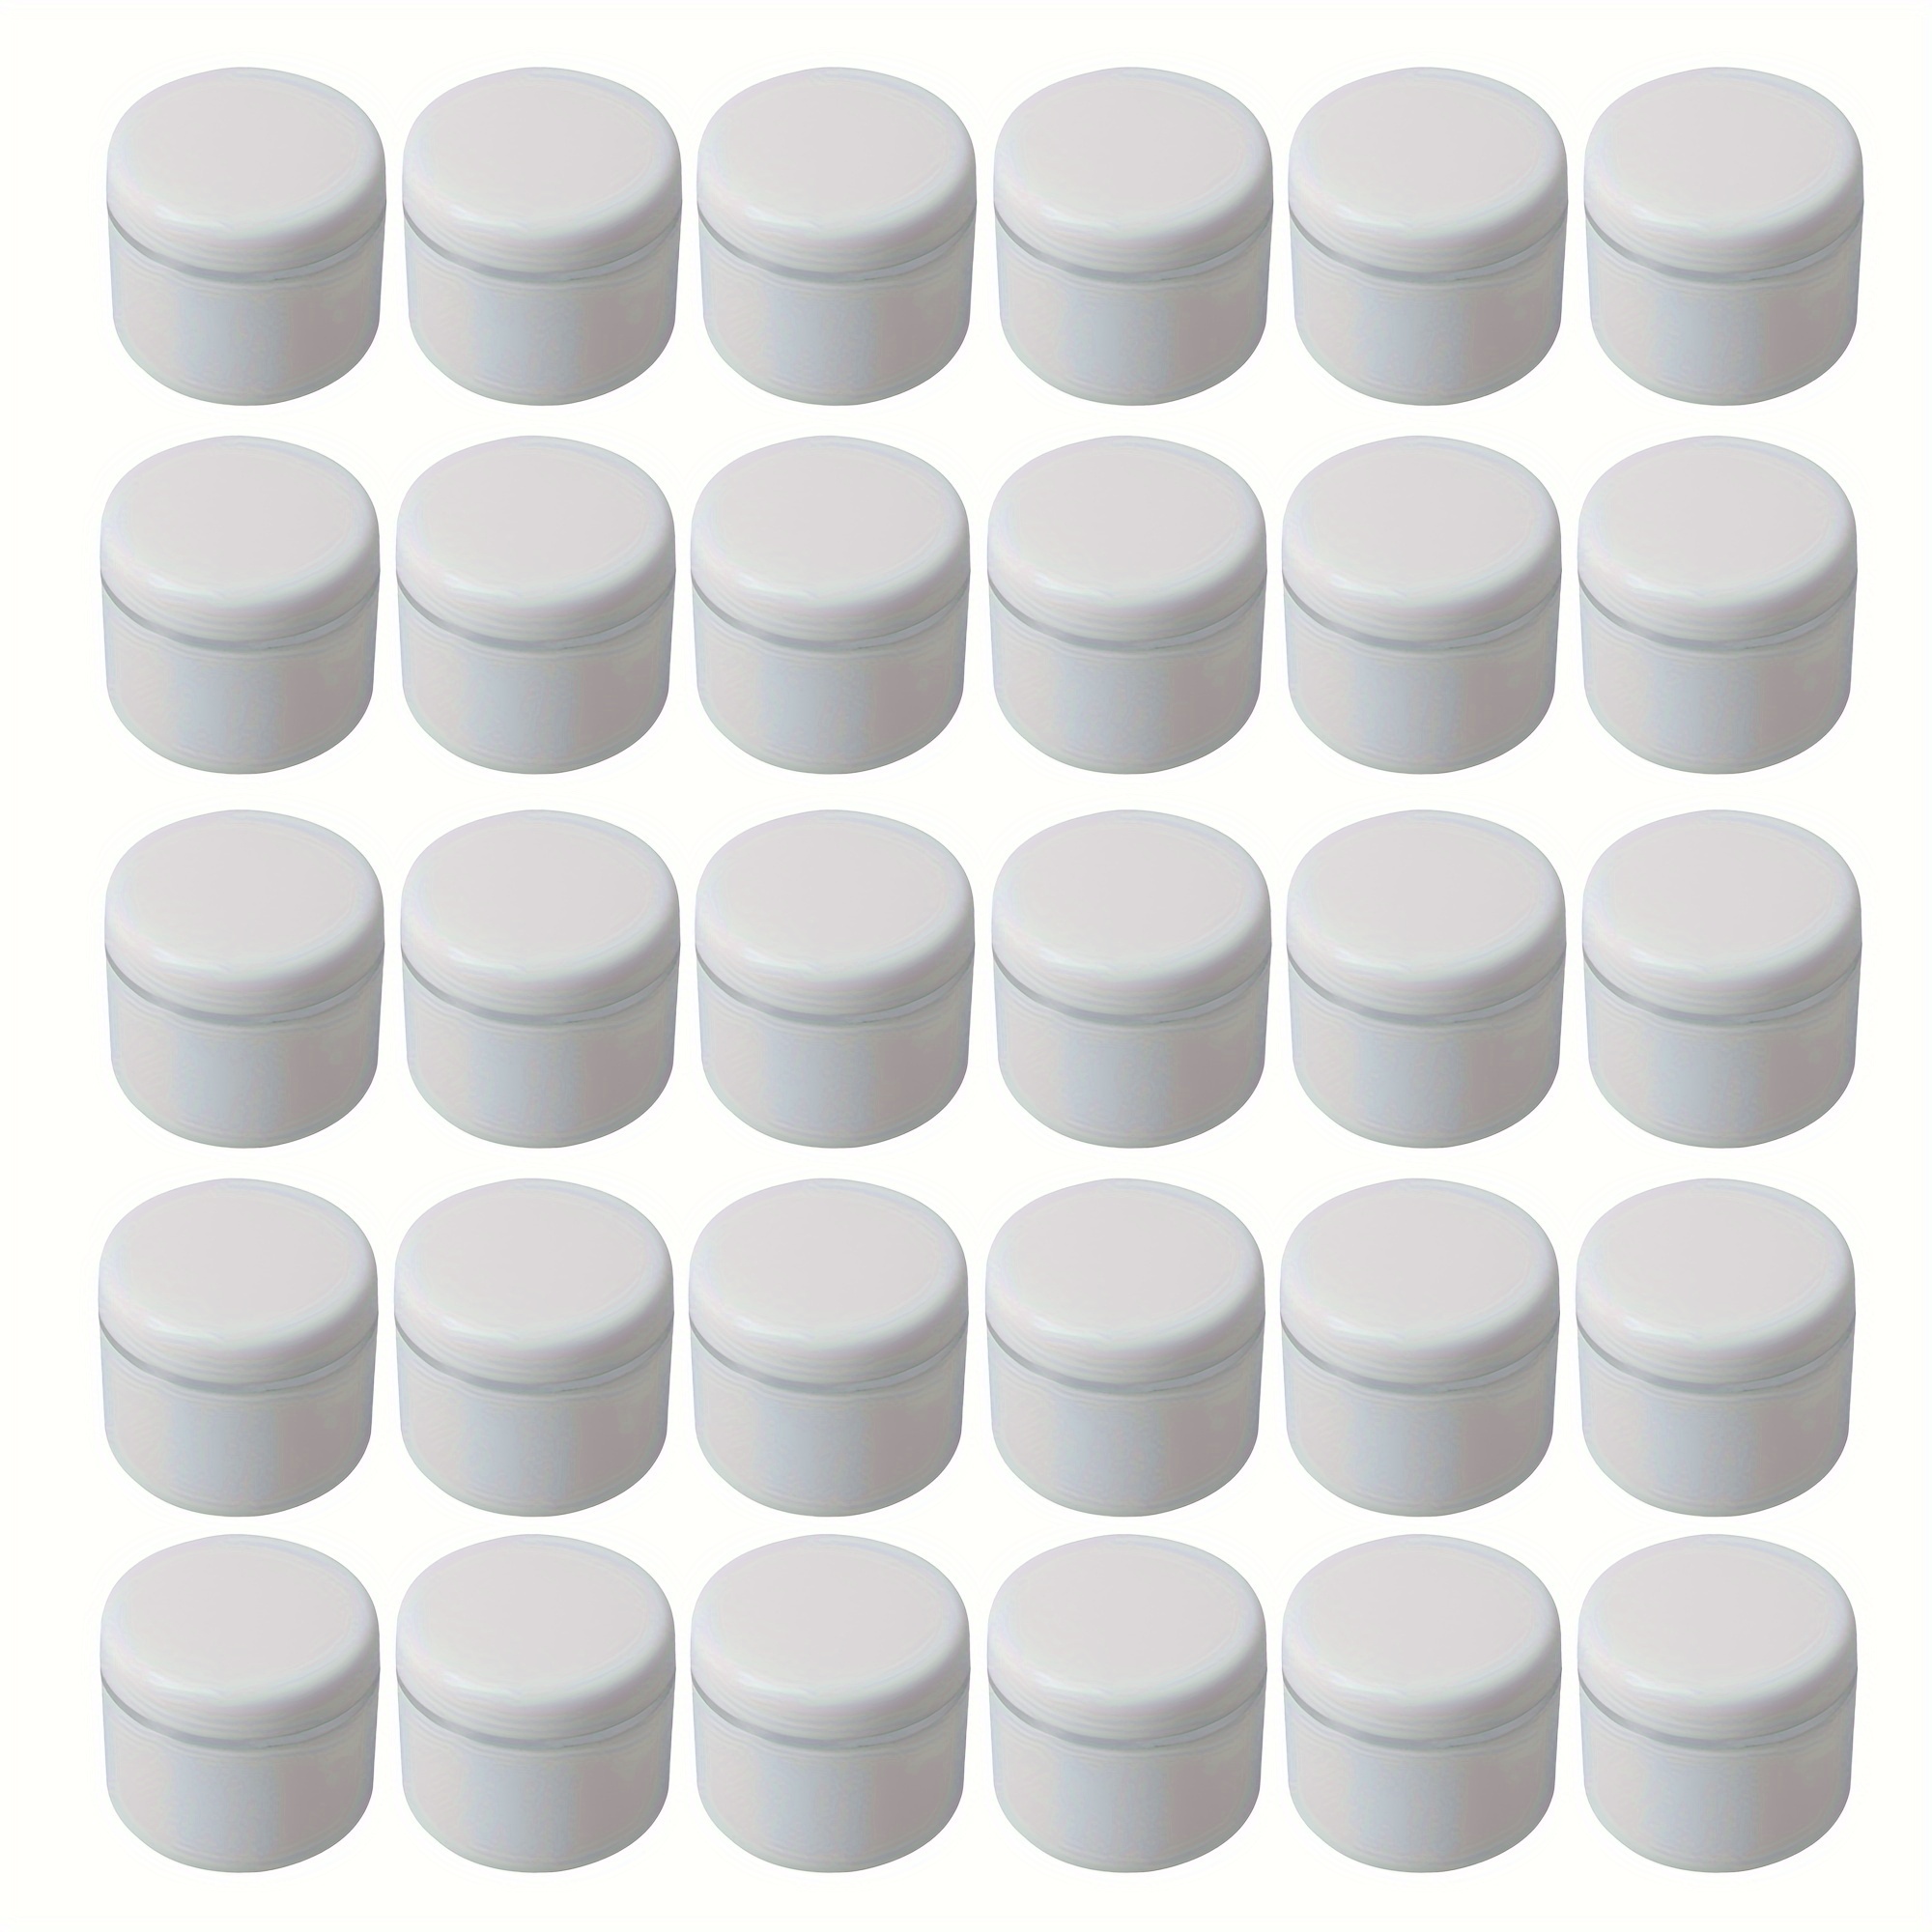 

30pcs 30g Empty Cream Jars, Refillable Cosmetic Container Storage Jars With Lids, Perfect Travel Jars For Cosmetics, Face Cream Lotion And More Beauty Products, Travel Essentials - White